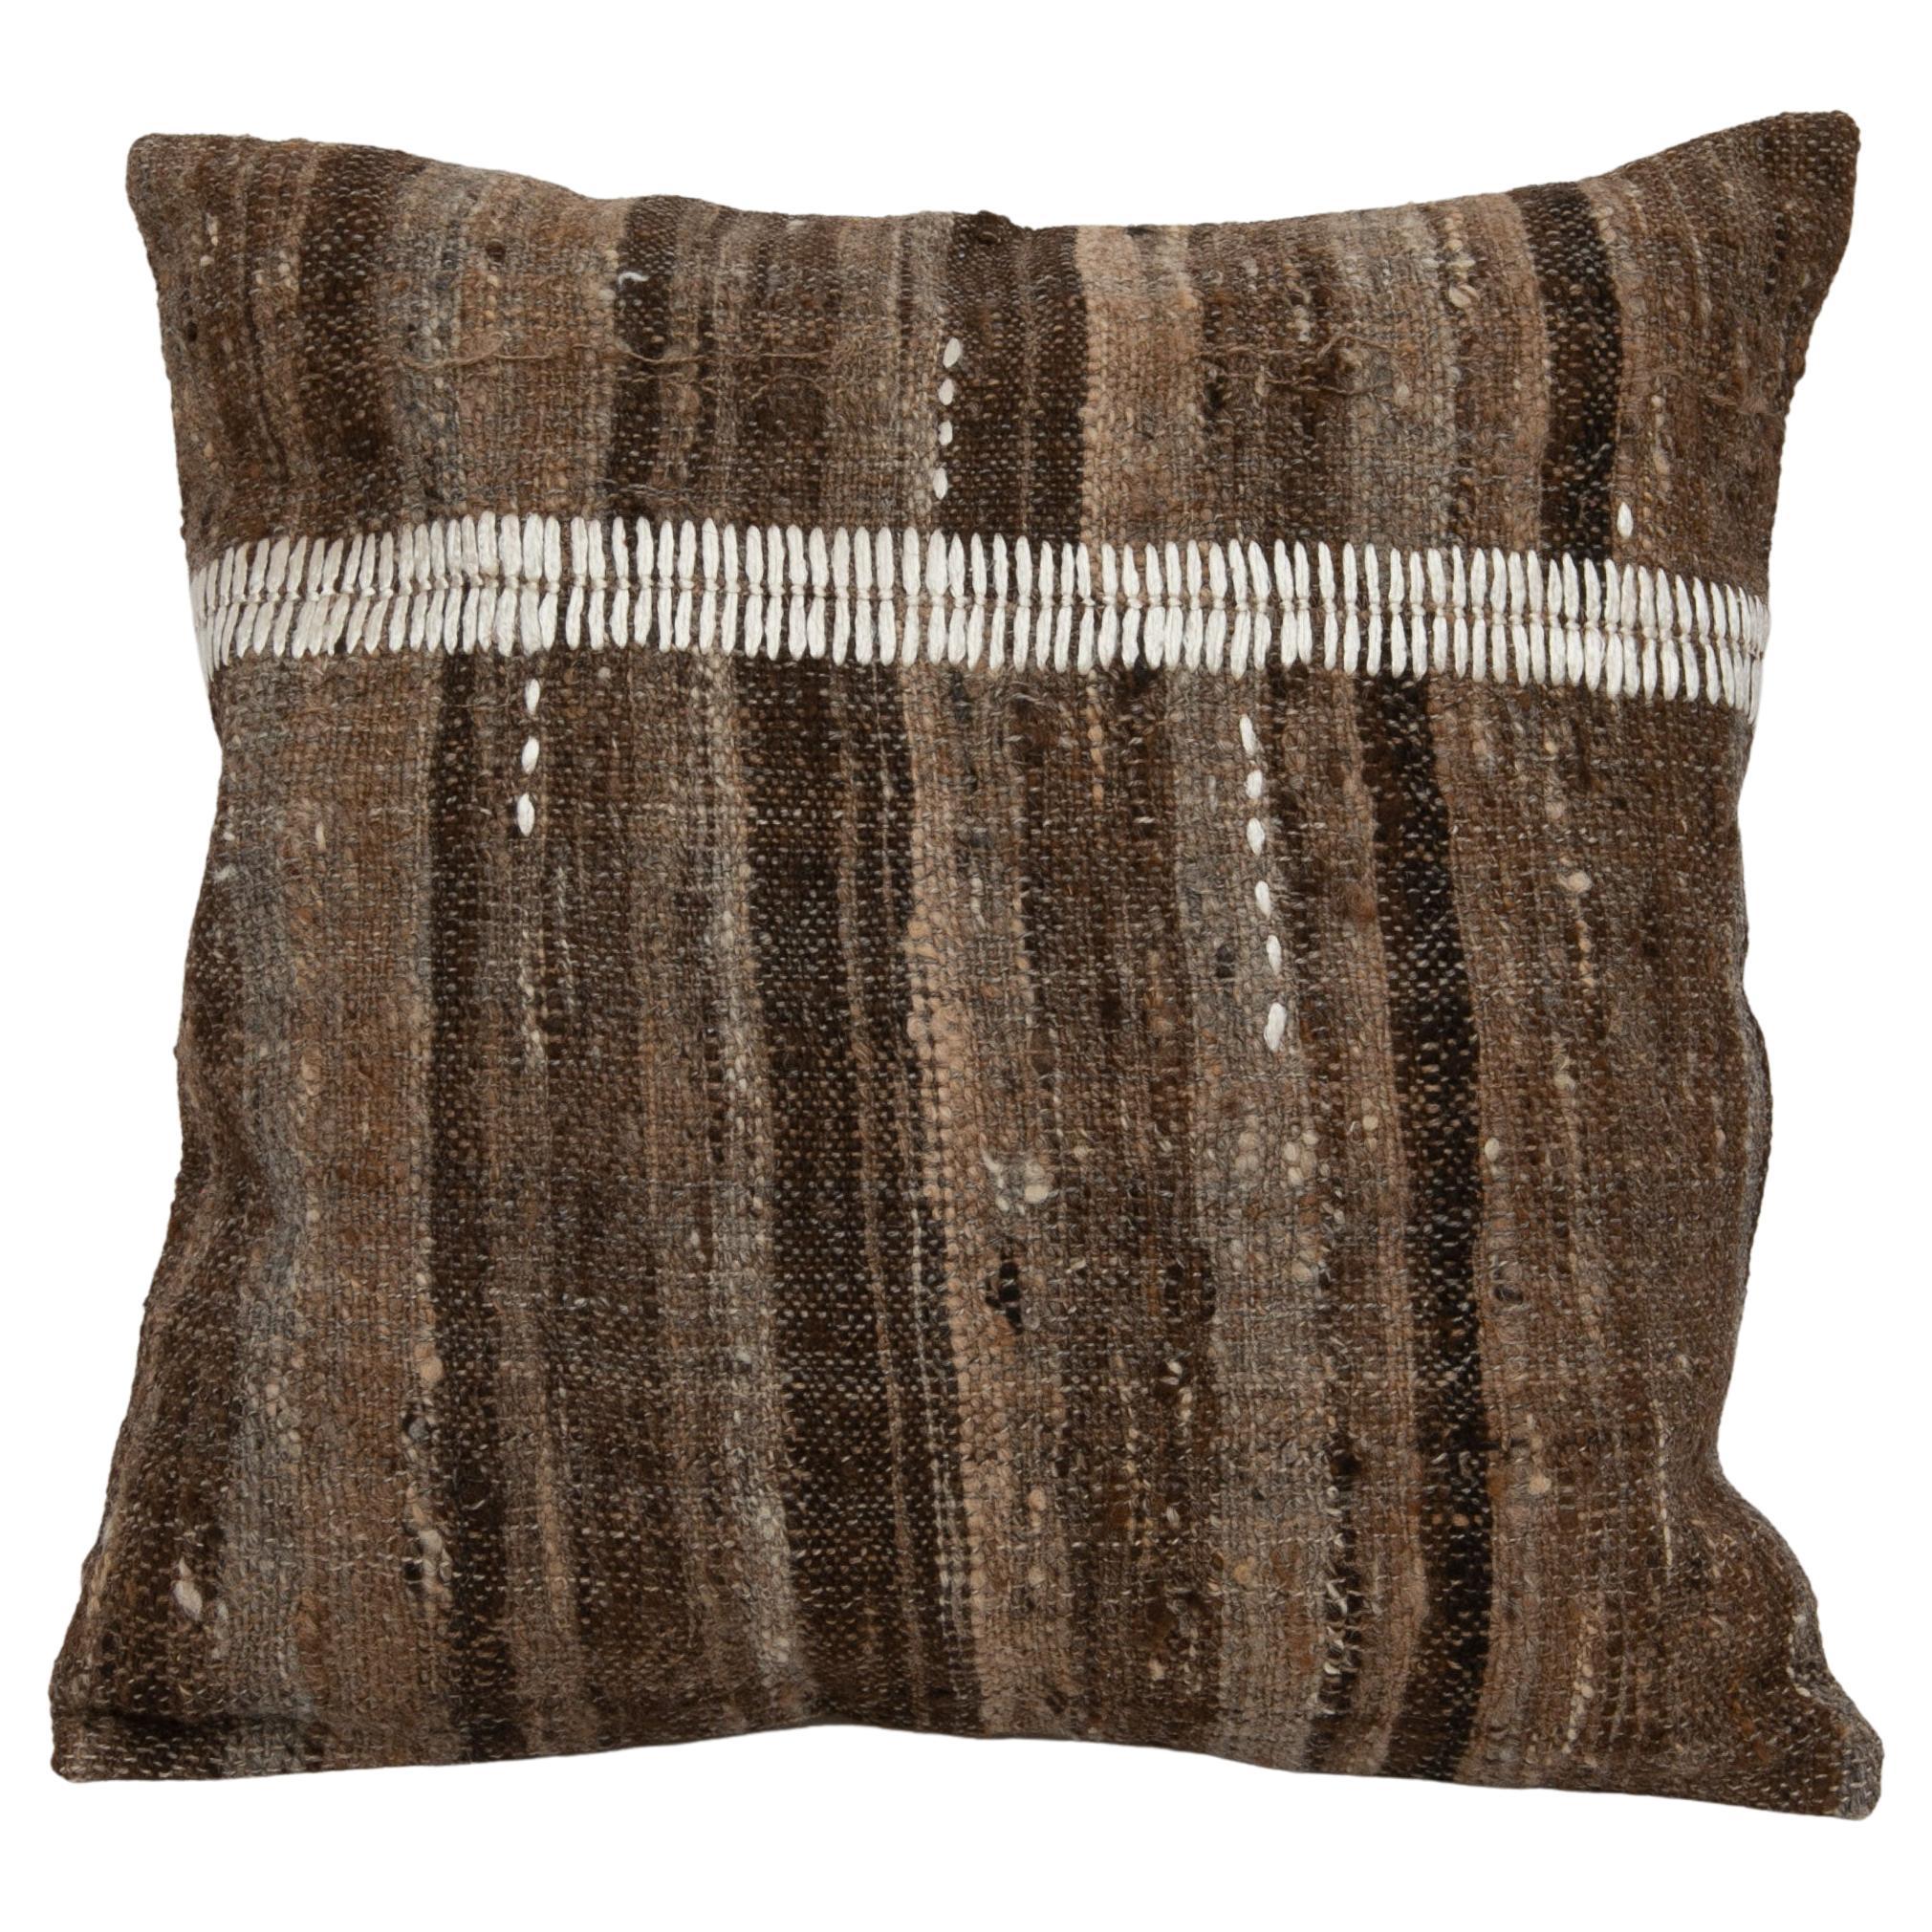 Rustic Pillow Case Made from a Vintage Un-dyed Wool Coverlet, mid 20th C.